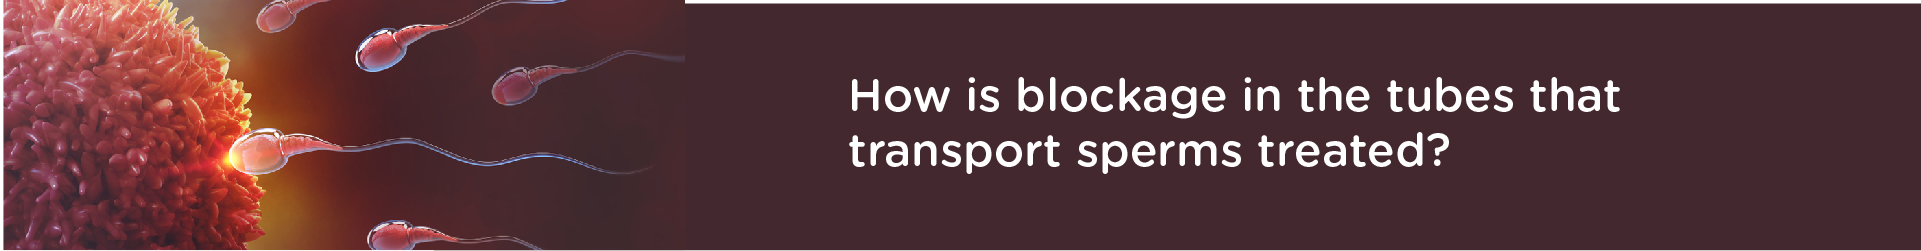 How is blockage in the tubes that transport sperms treated?